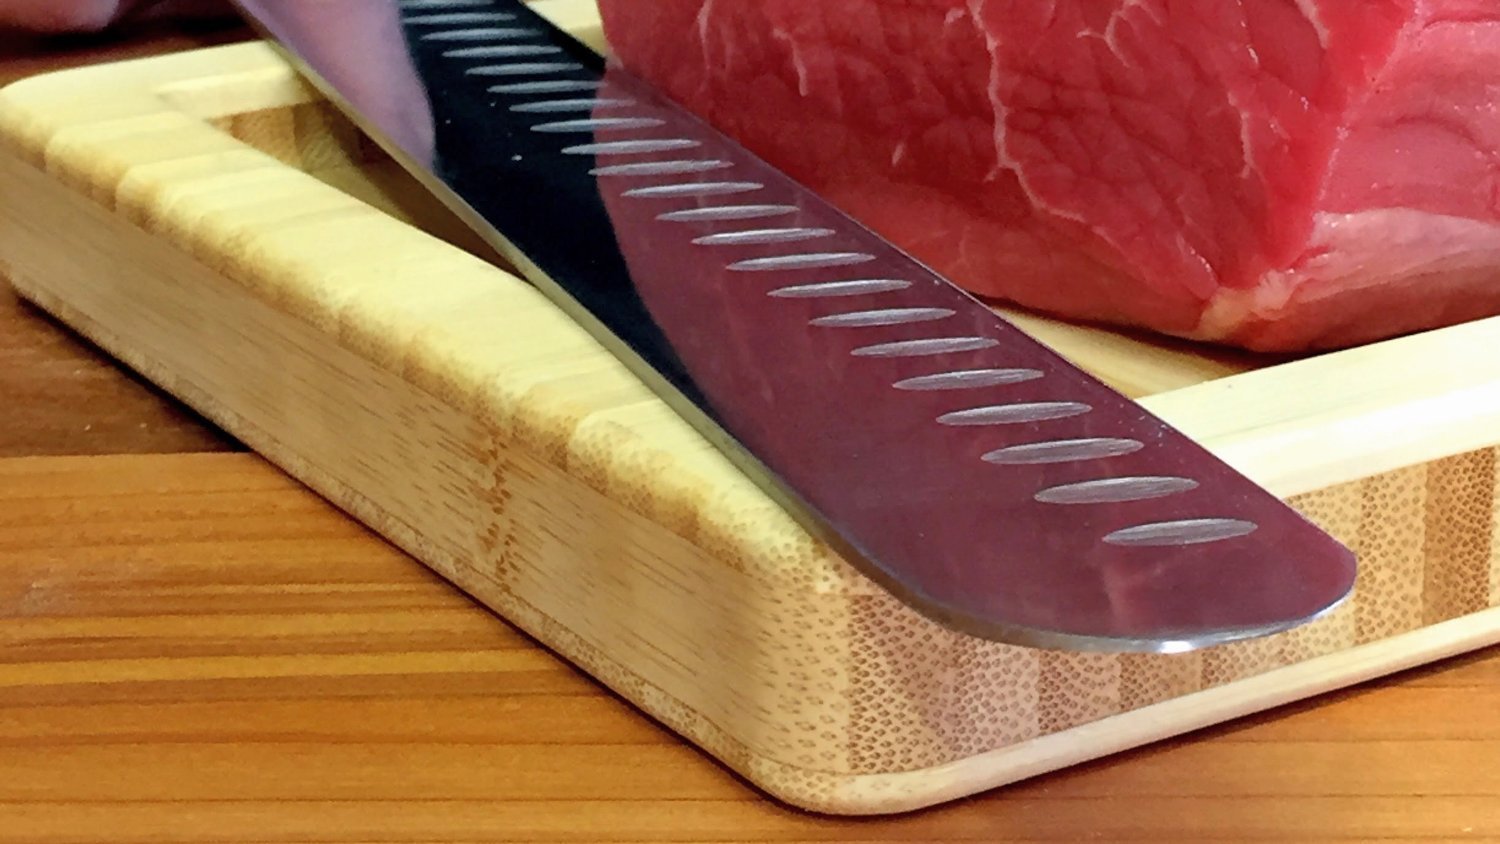 Professional Jerky Meat Slicing Knife - Stainless like the Pros